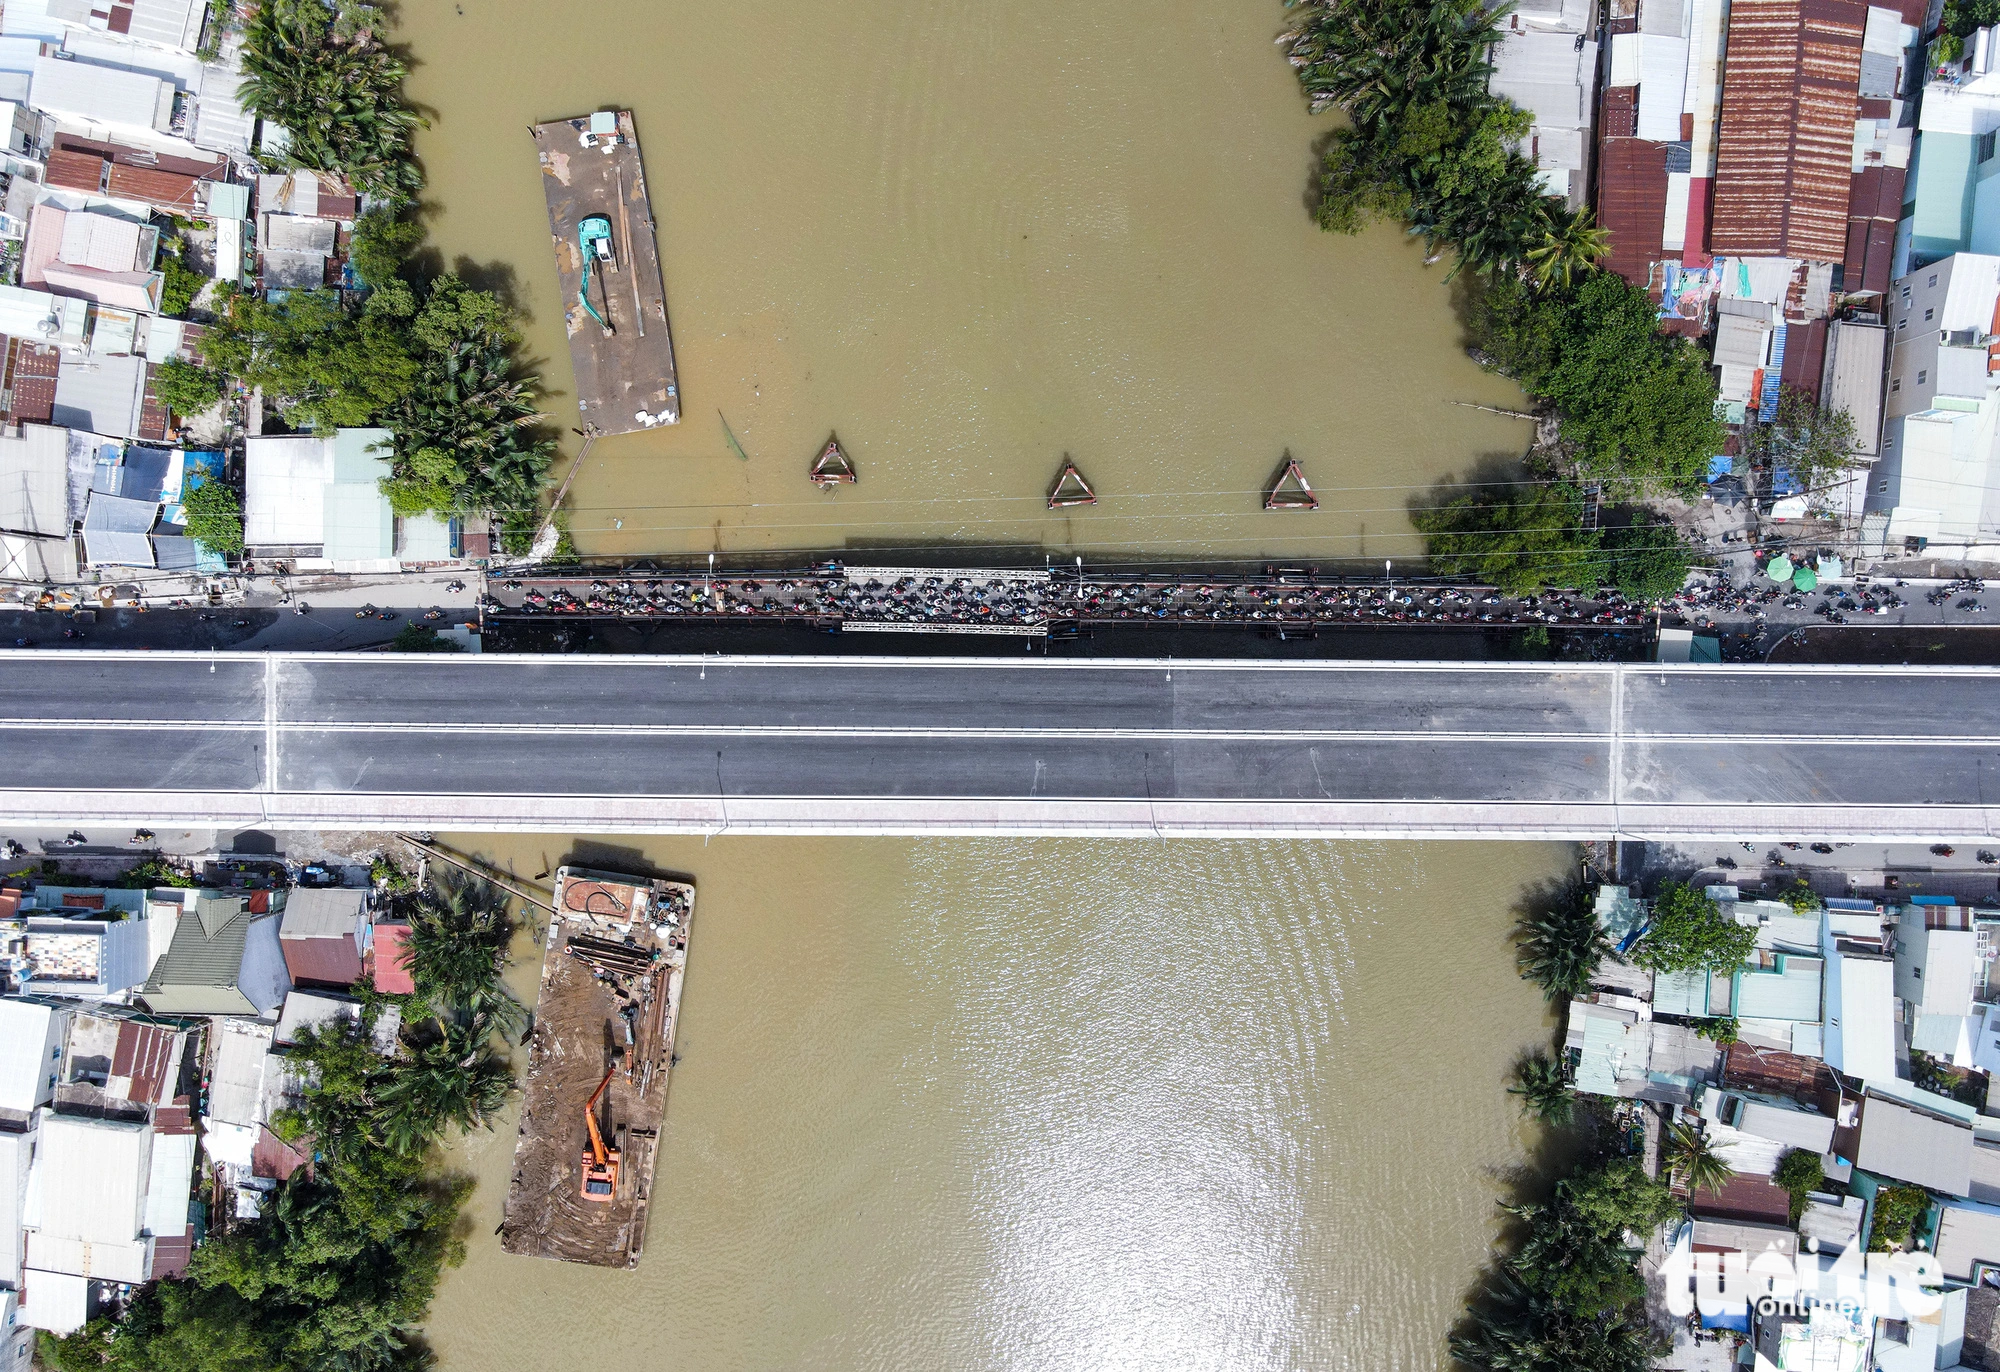 The Ho Chi Minh City People’s Committee approved the new Long Kieng Bridge project in 2001. The 318-meter-long bridge project with two approaching roads measuring 661 meters in length requires an estimated investment of VND589 billion (US$24.3 million).